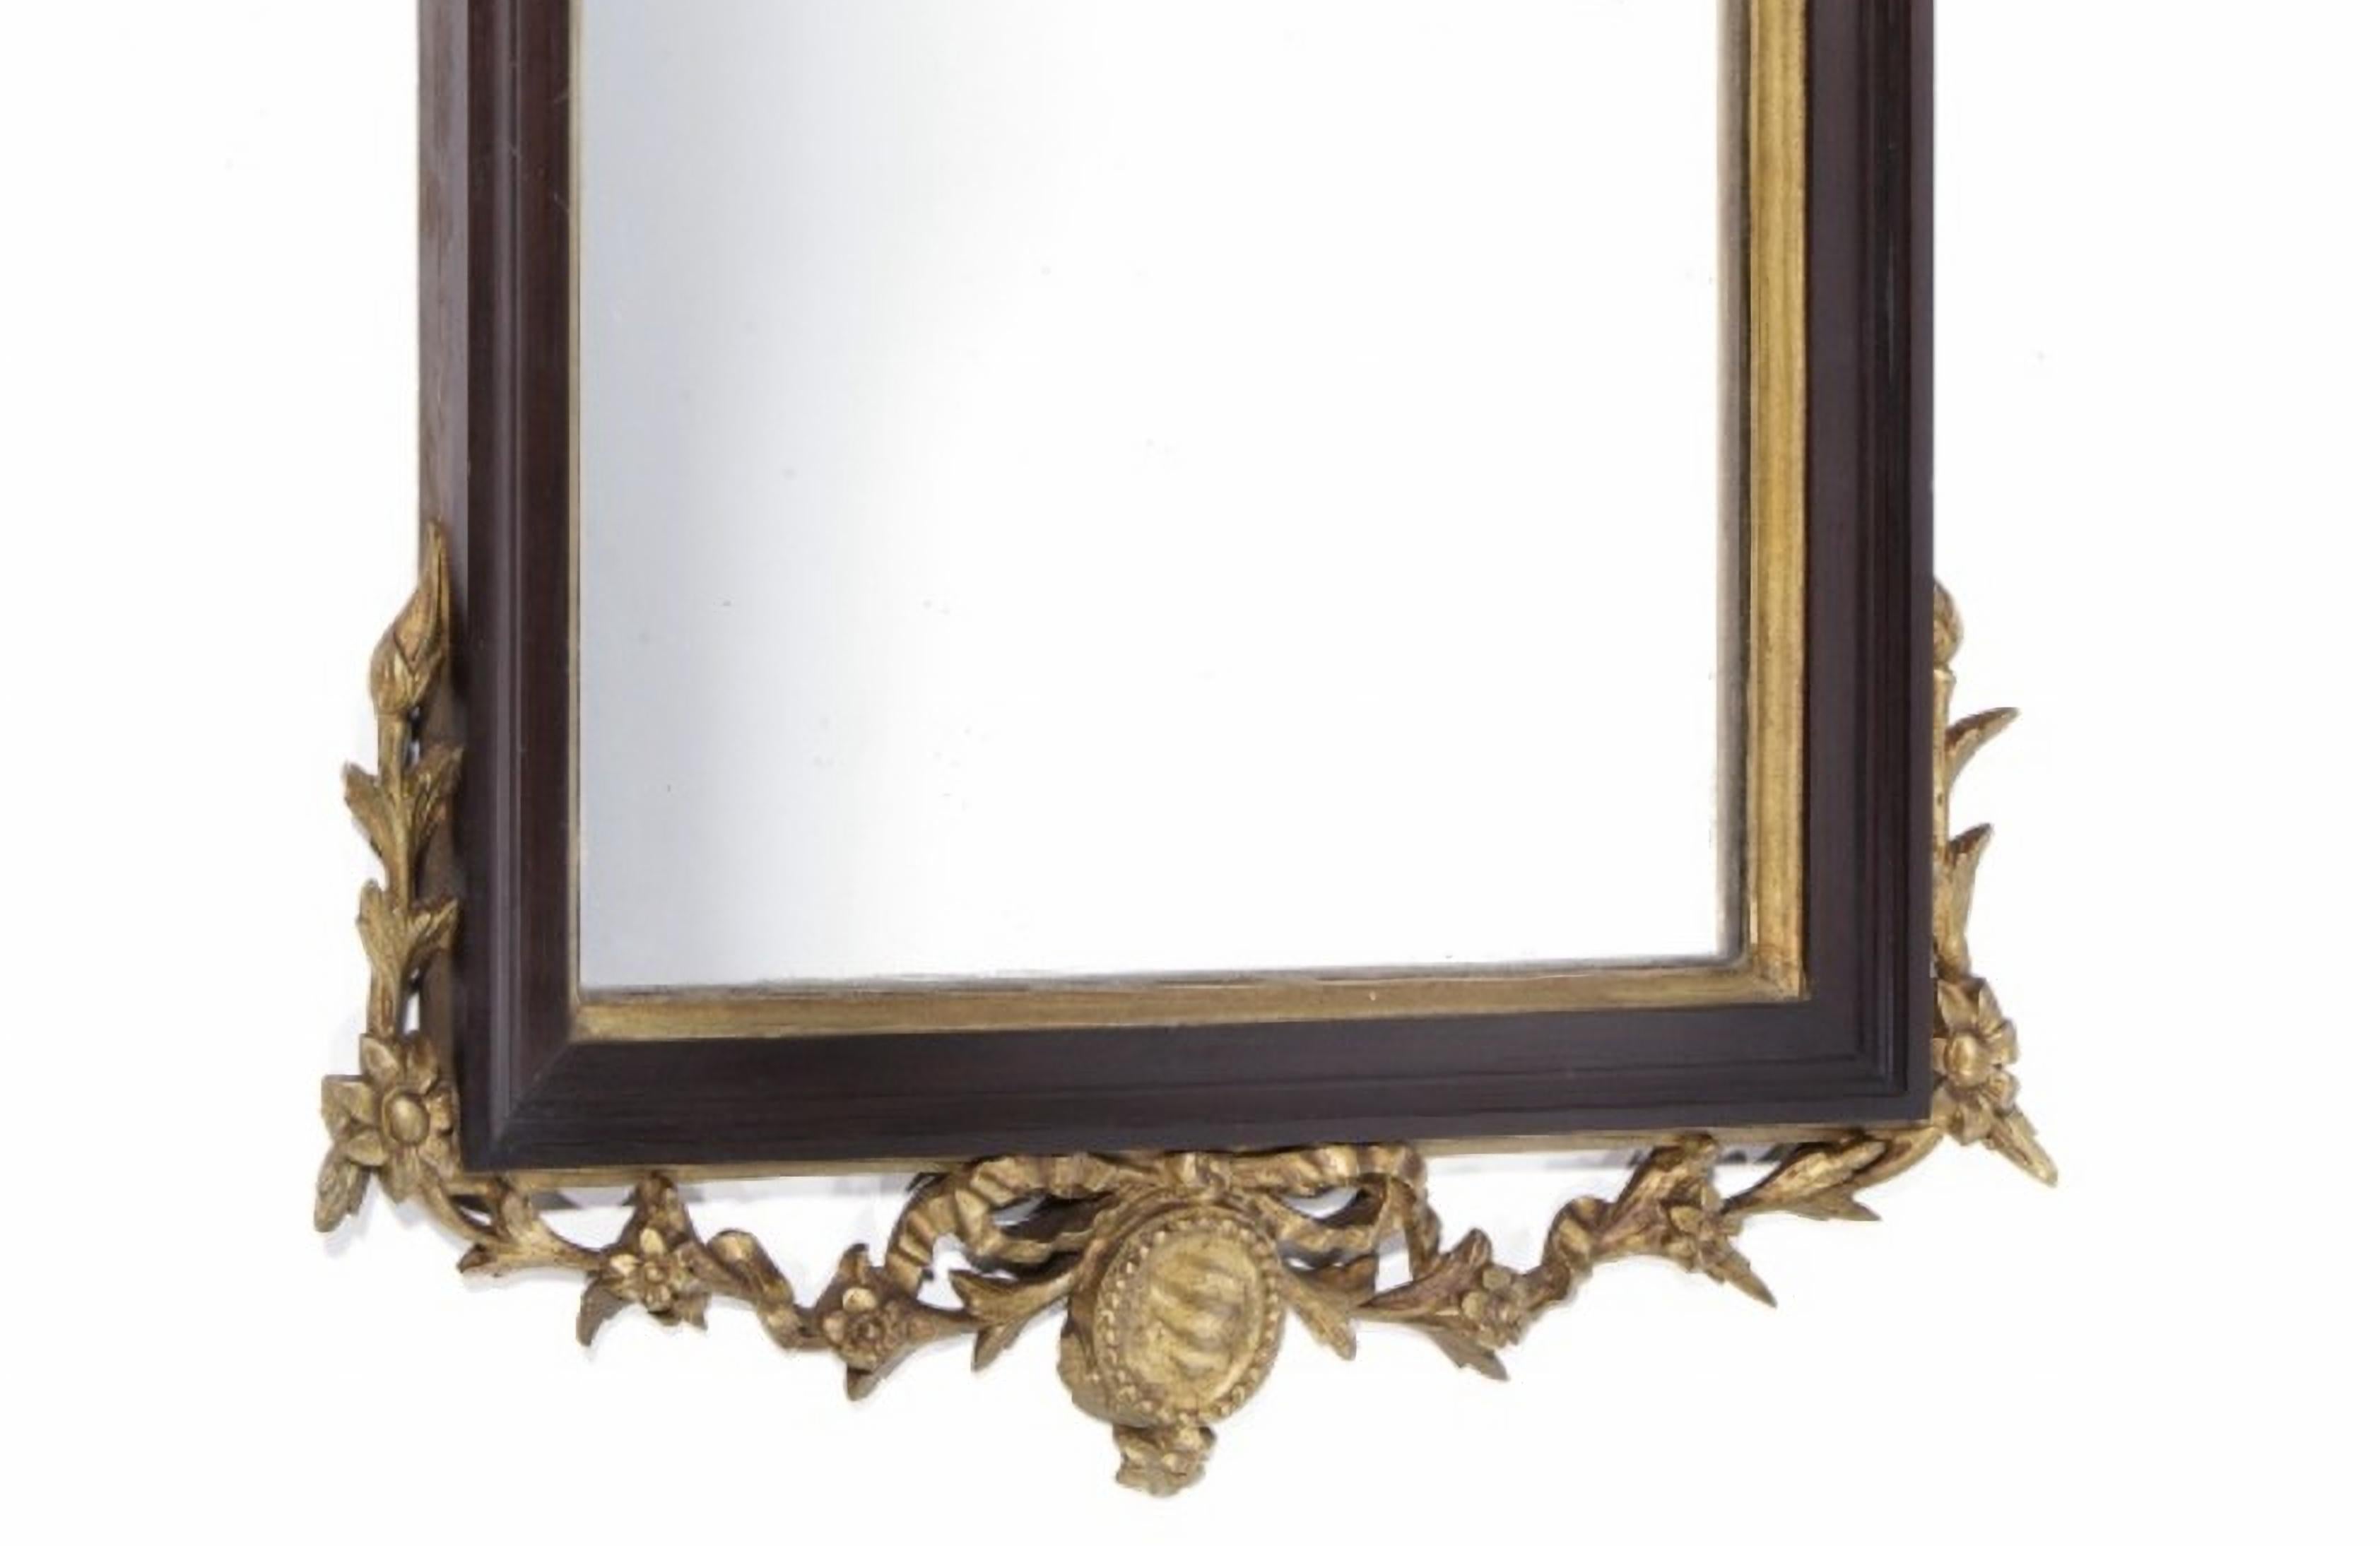 Portuguese mirror with frame, 19th century.

In kingwood and carved, pierced and gilded wood.
Dim.: 116 x 50 cm.
Good conditions.